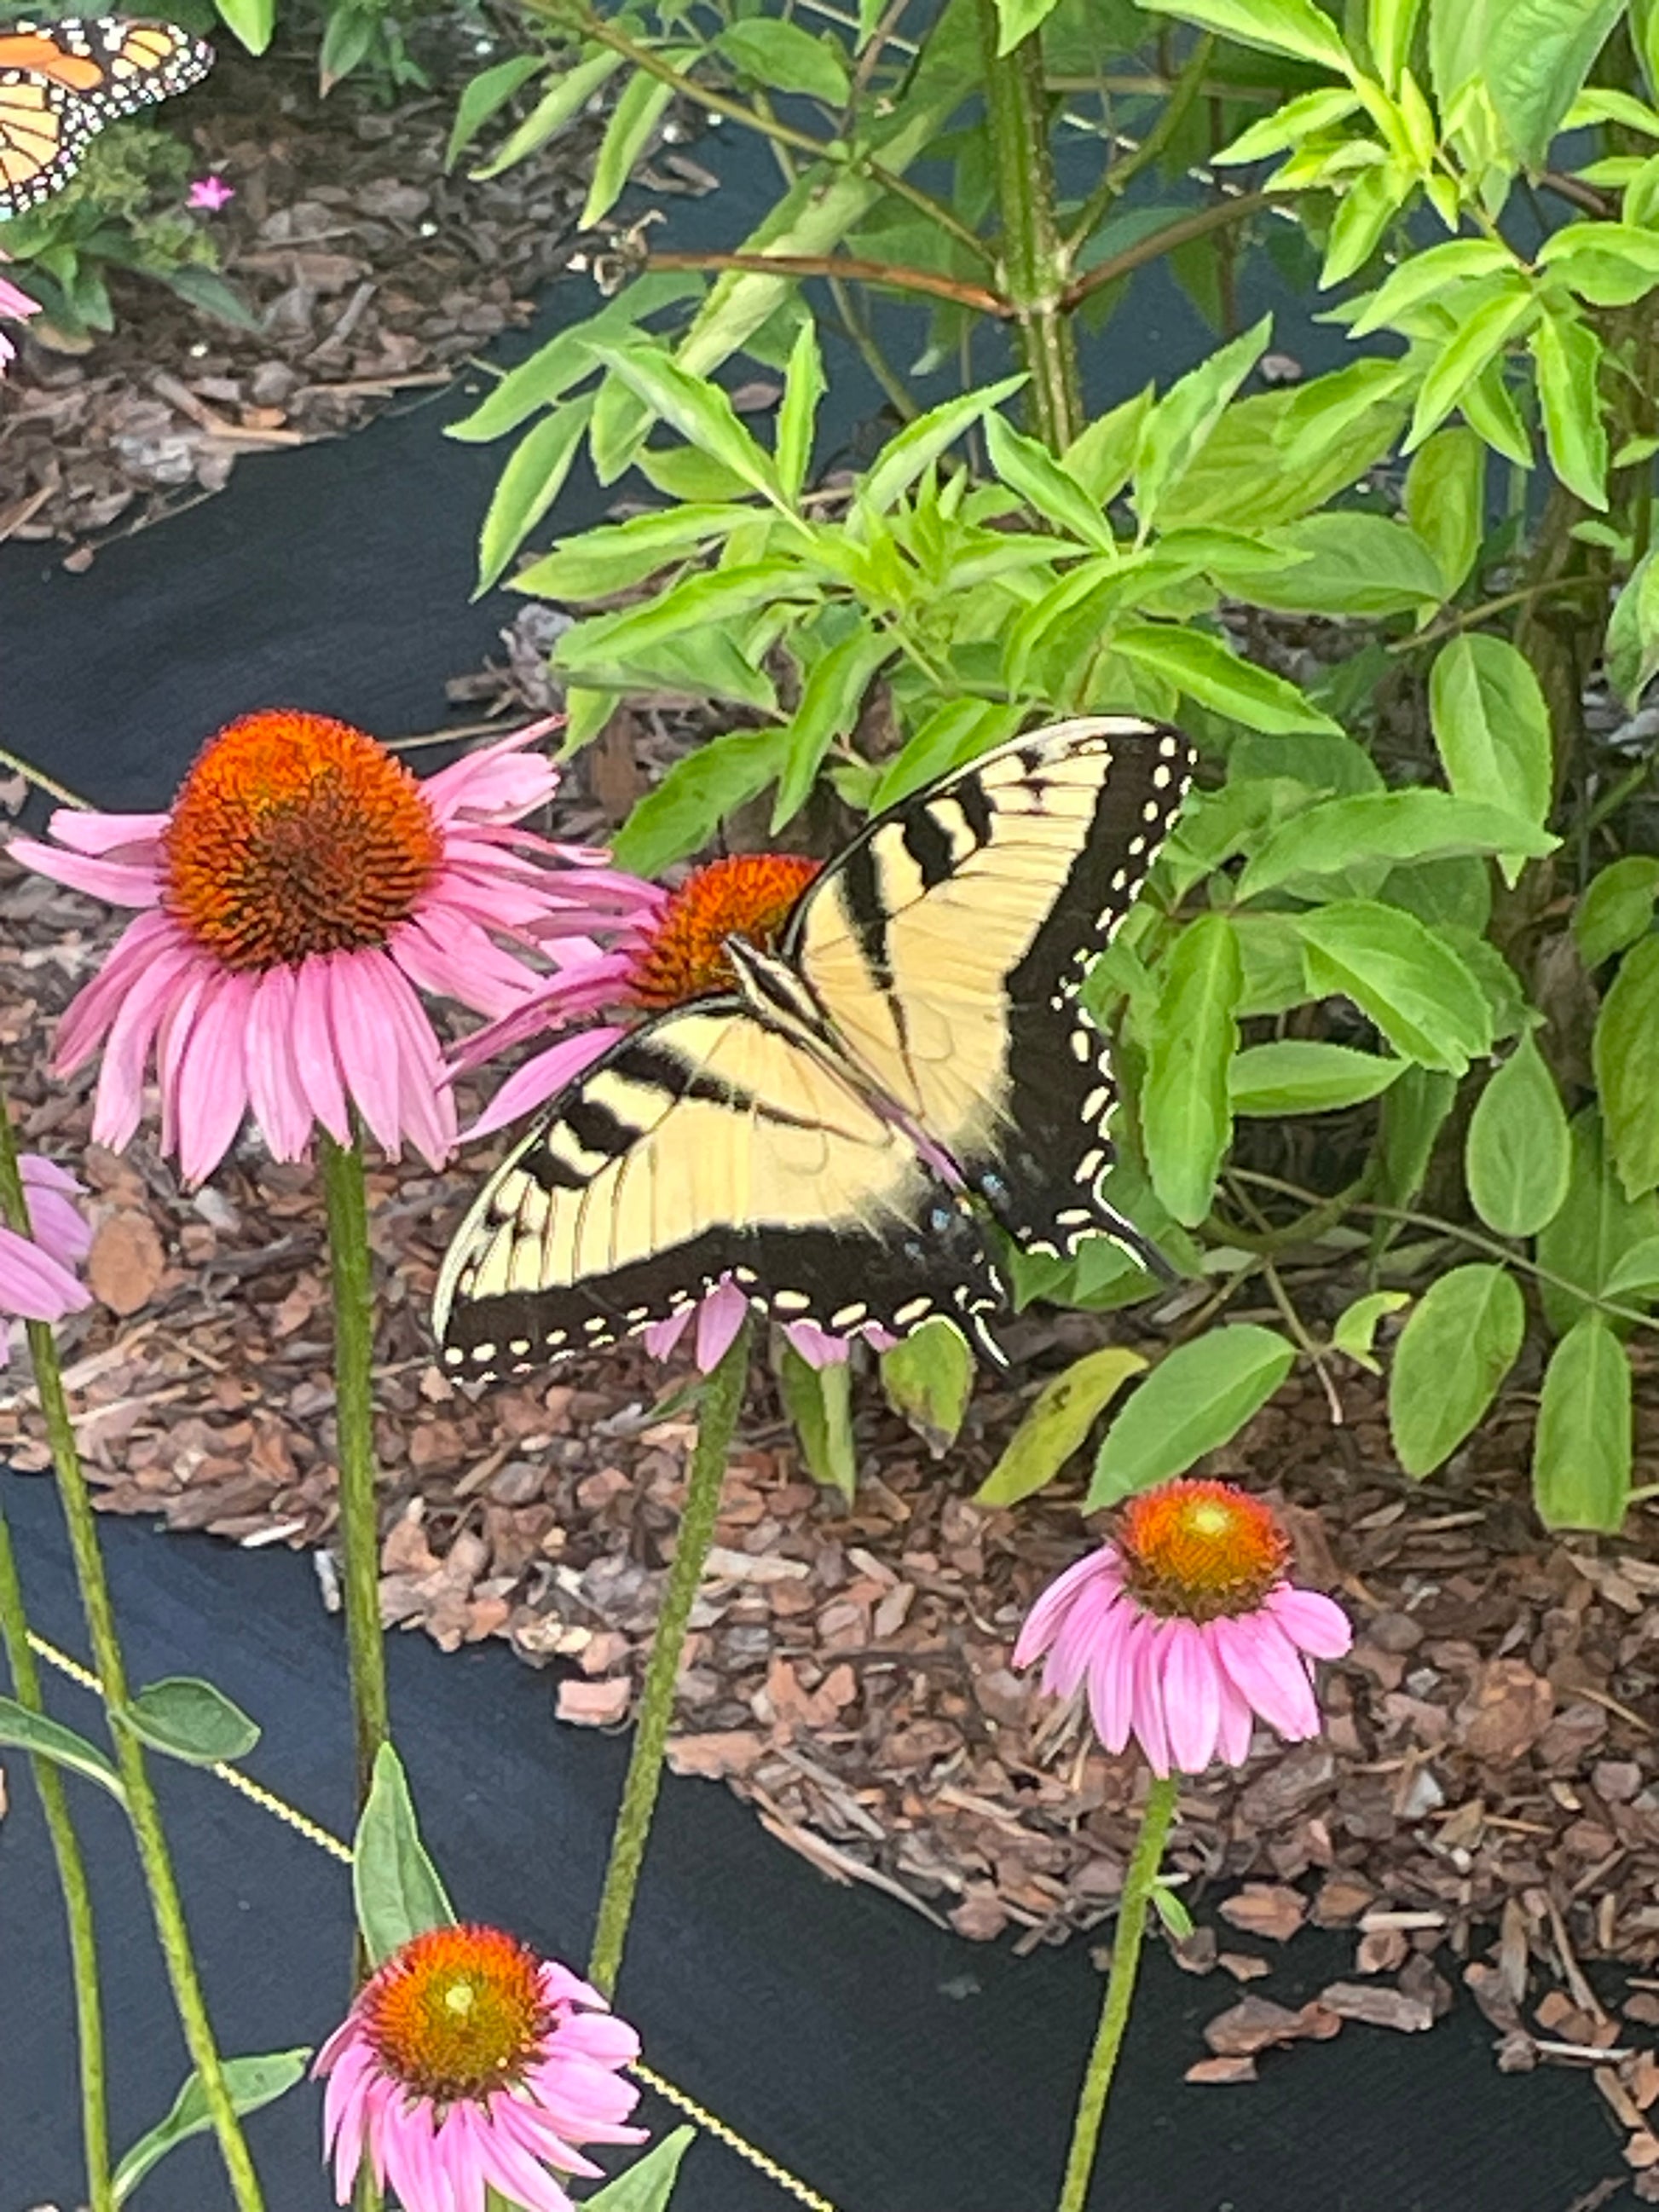 giant swallowtail butterfly uses zanthoxylum american as host plant